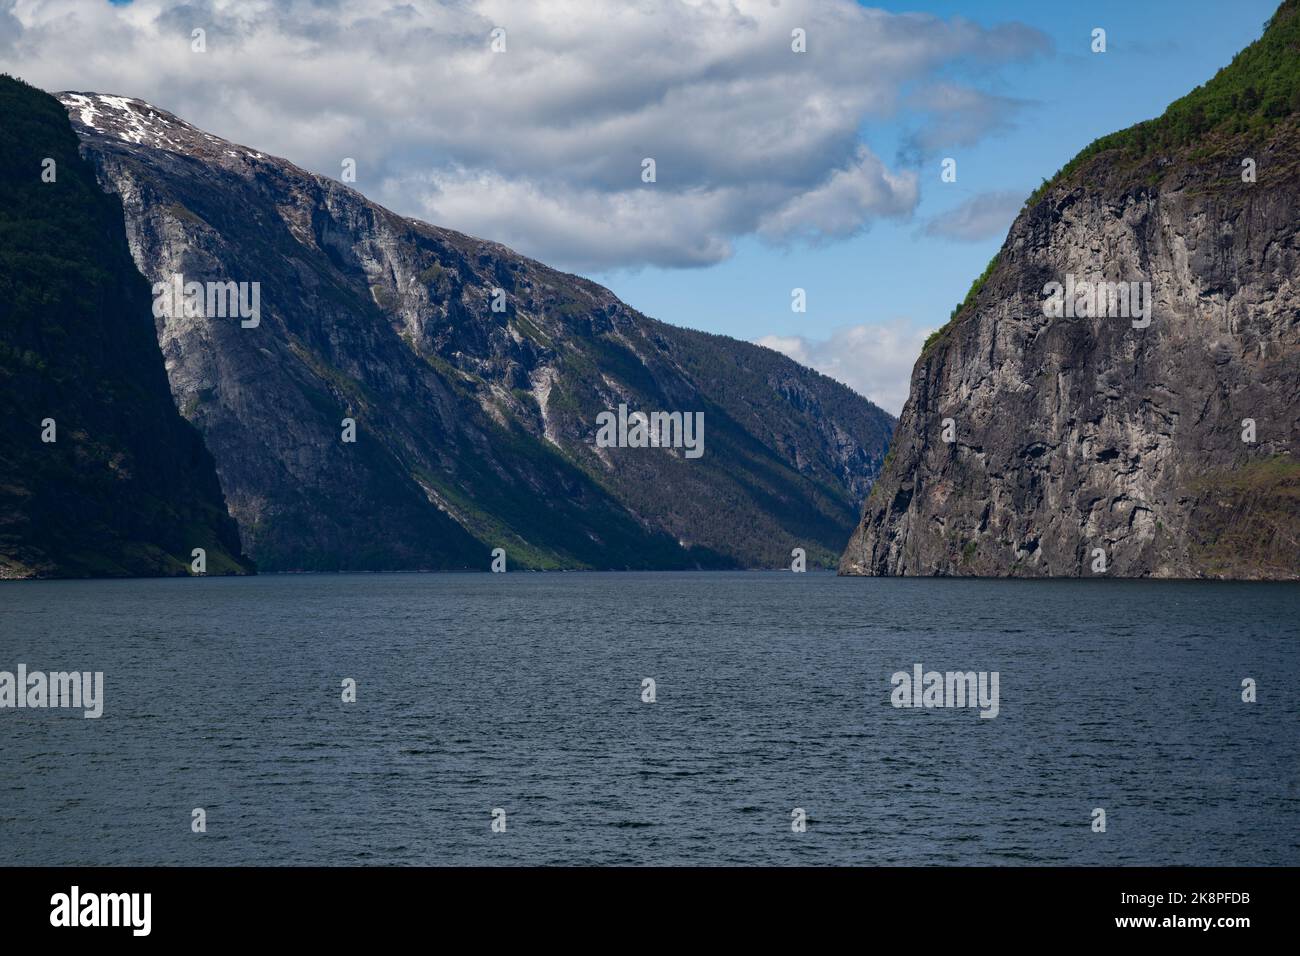 A lake under mountains in Narrow Fjord, Aurland Municipality in Vestland county, Norway Stock Photo